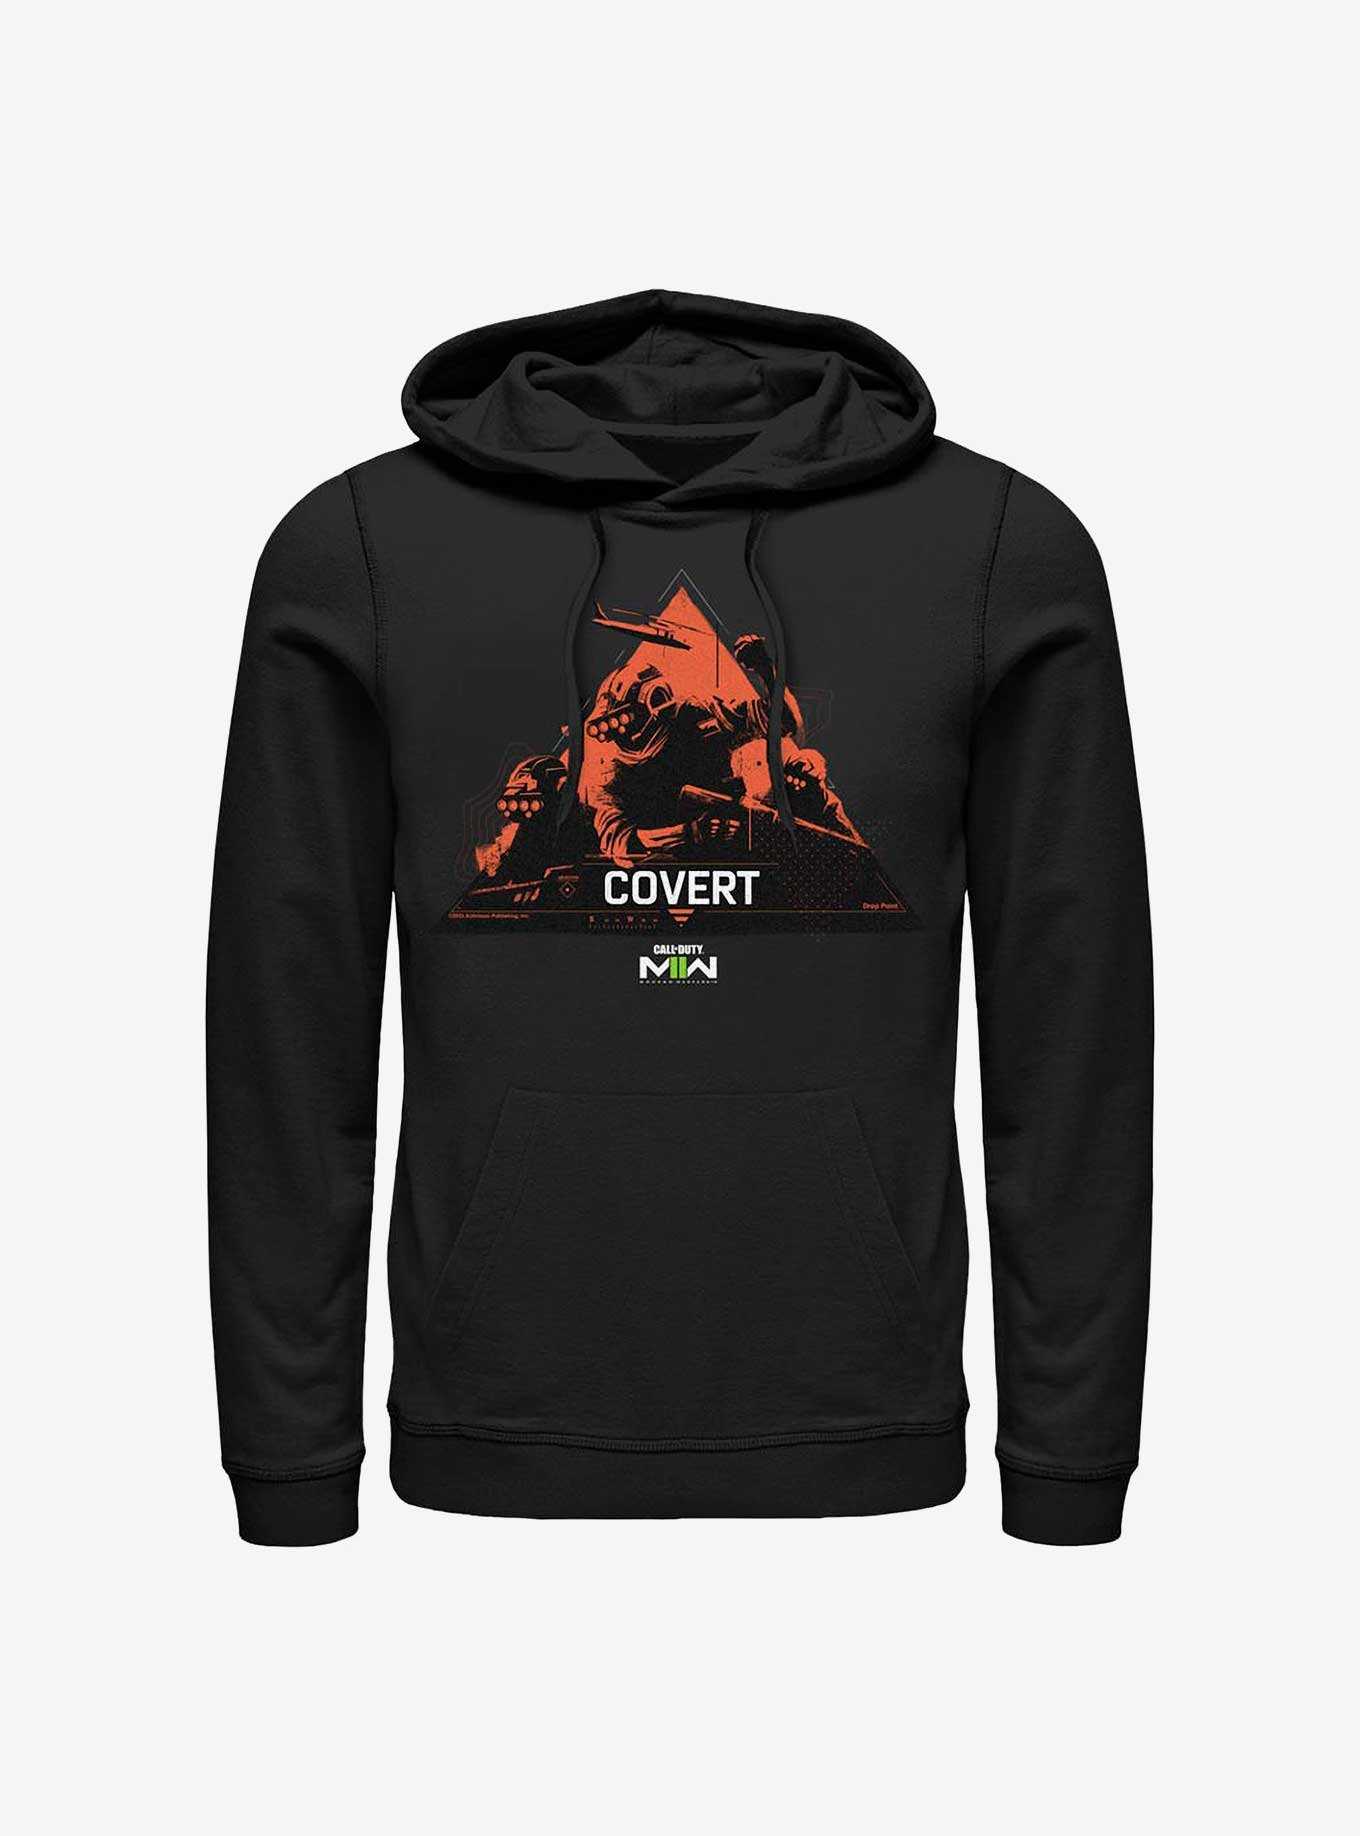 Call Of Duty Covert Red Variant Hoodie, , hi-res